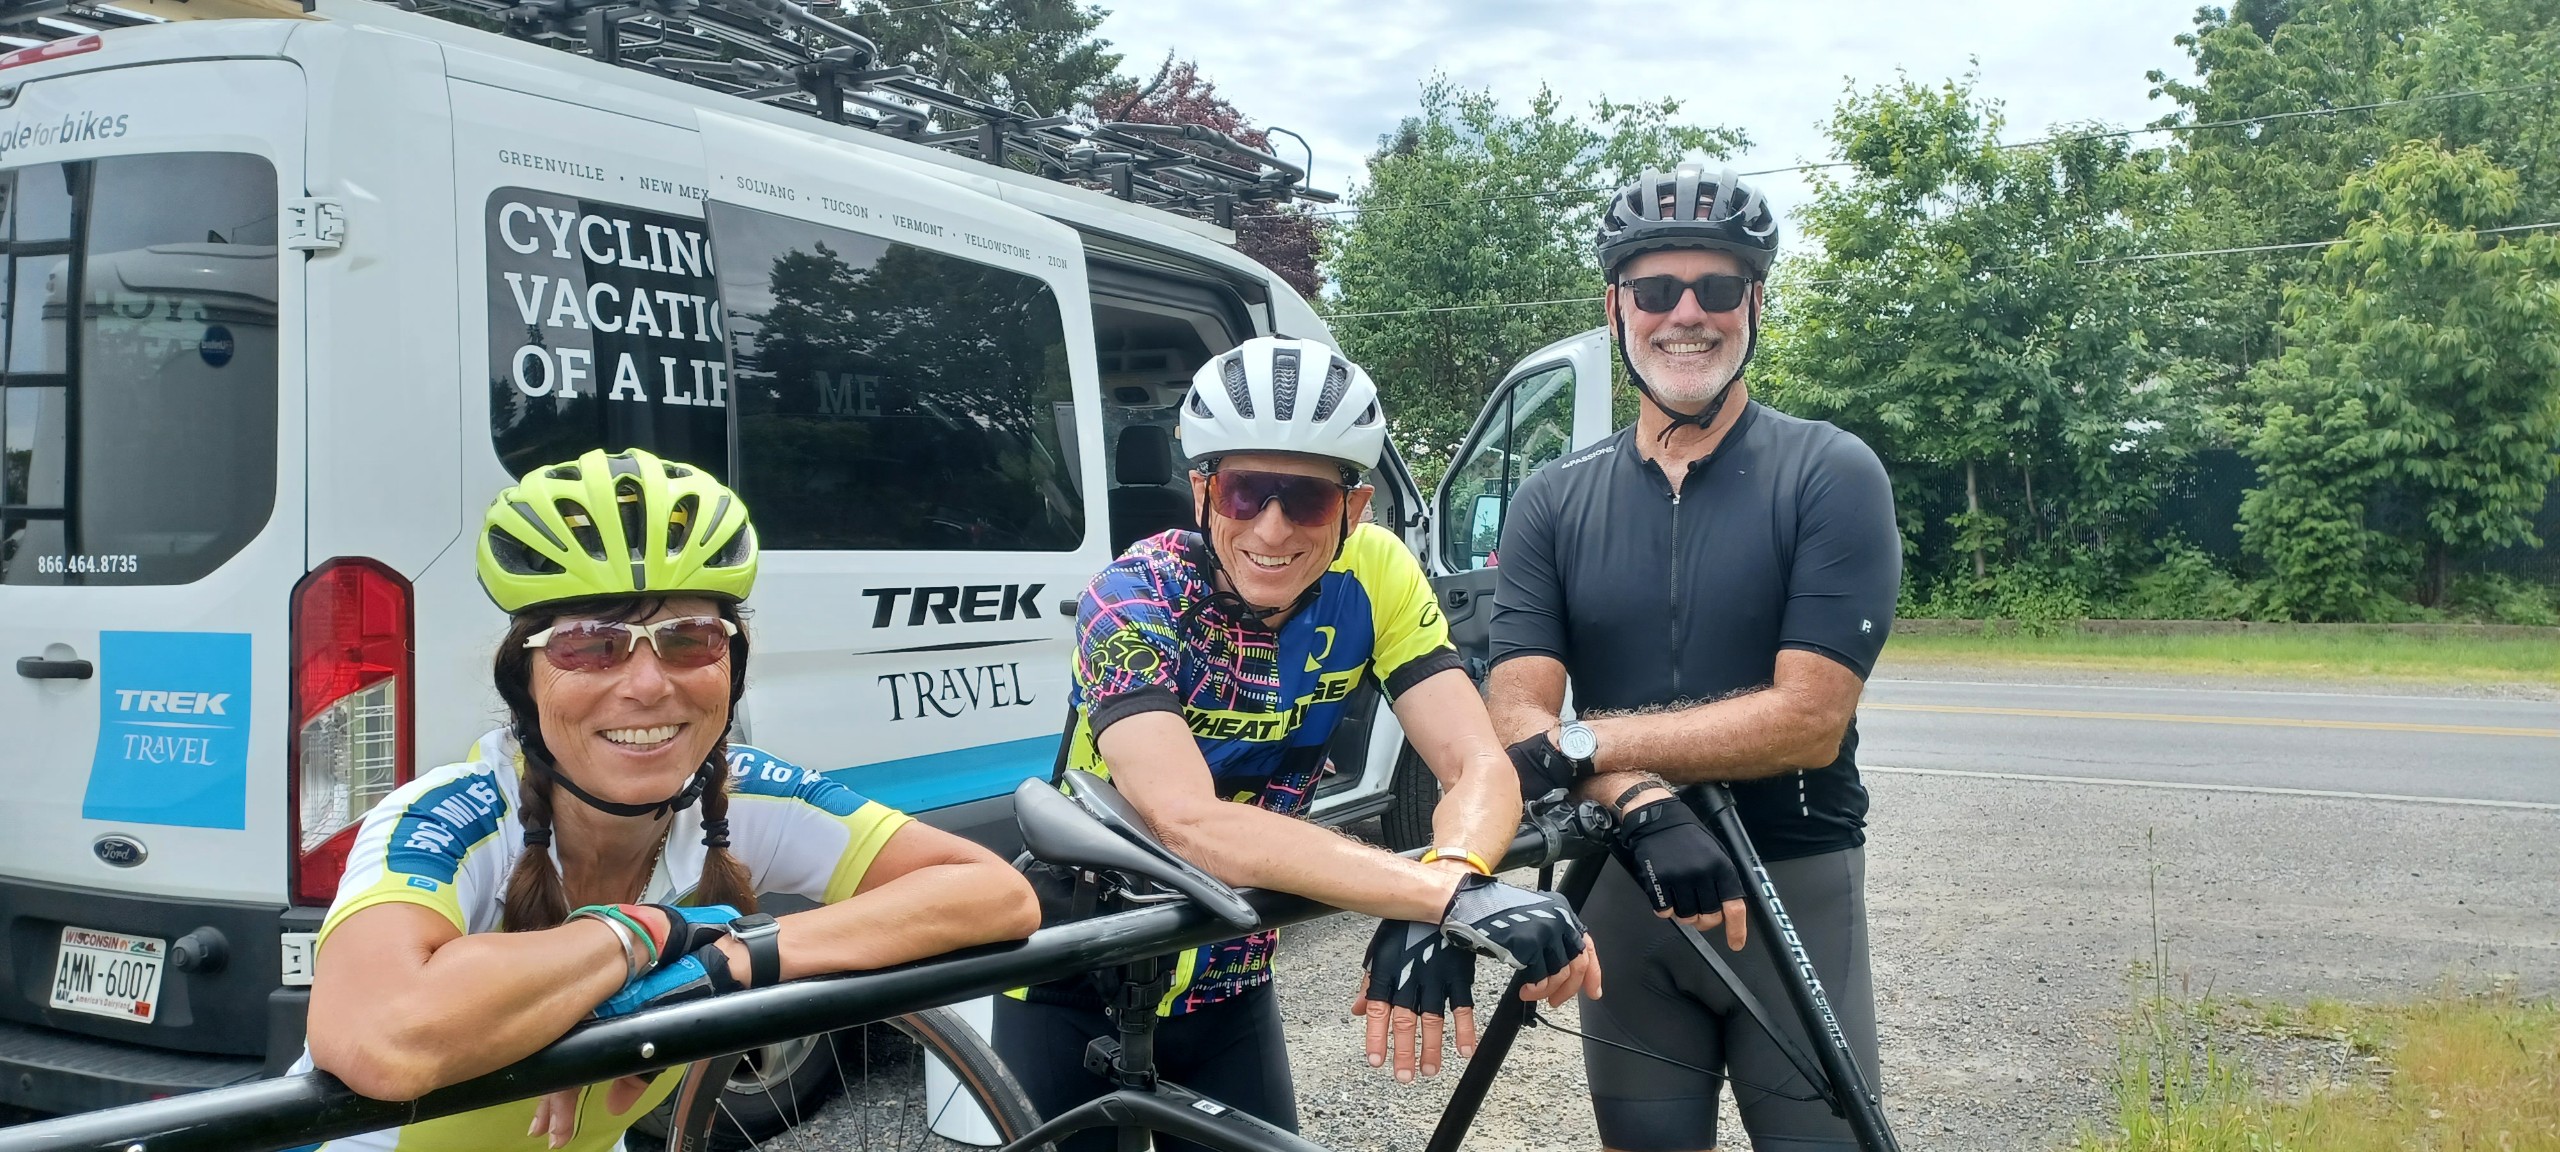 Three cyclists smiling and leaning on bike rack in front of Trek Travel van